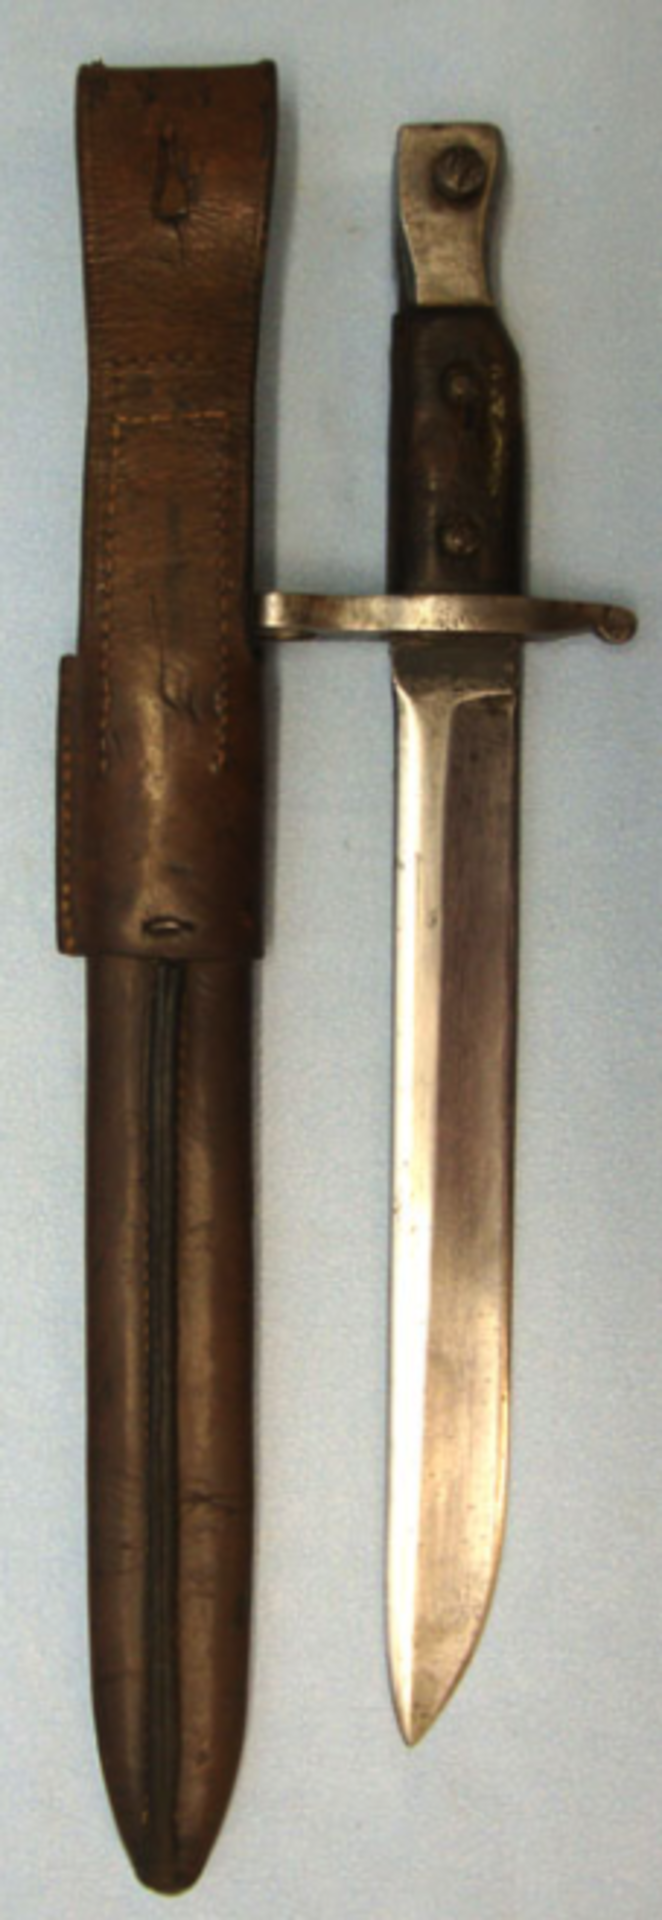 British Contract Ross Bayonet & Scabbard. - Image 3 of 3